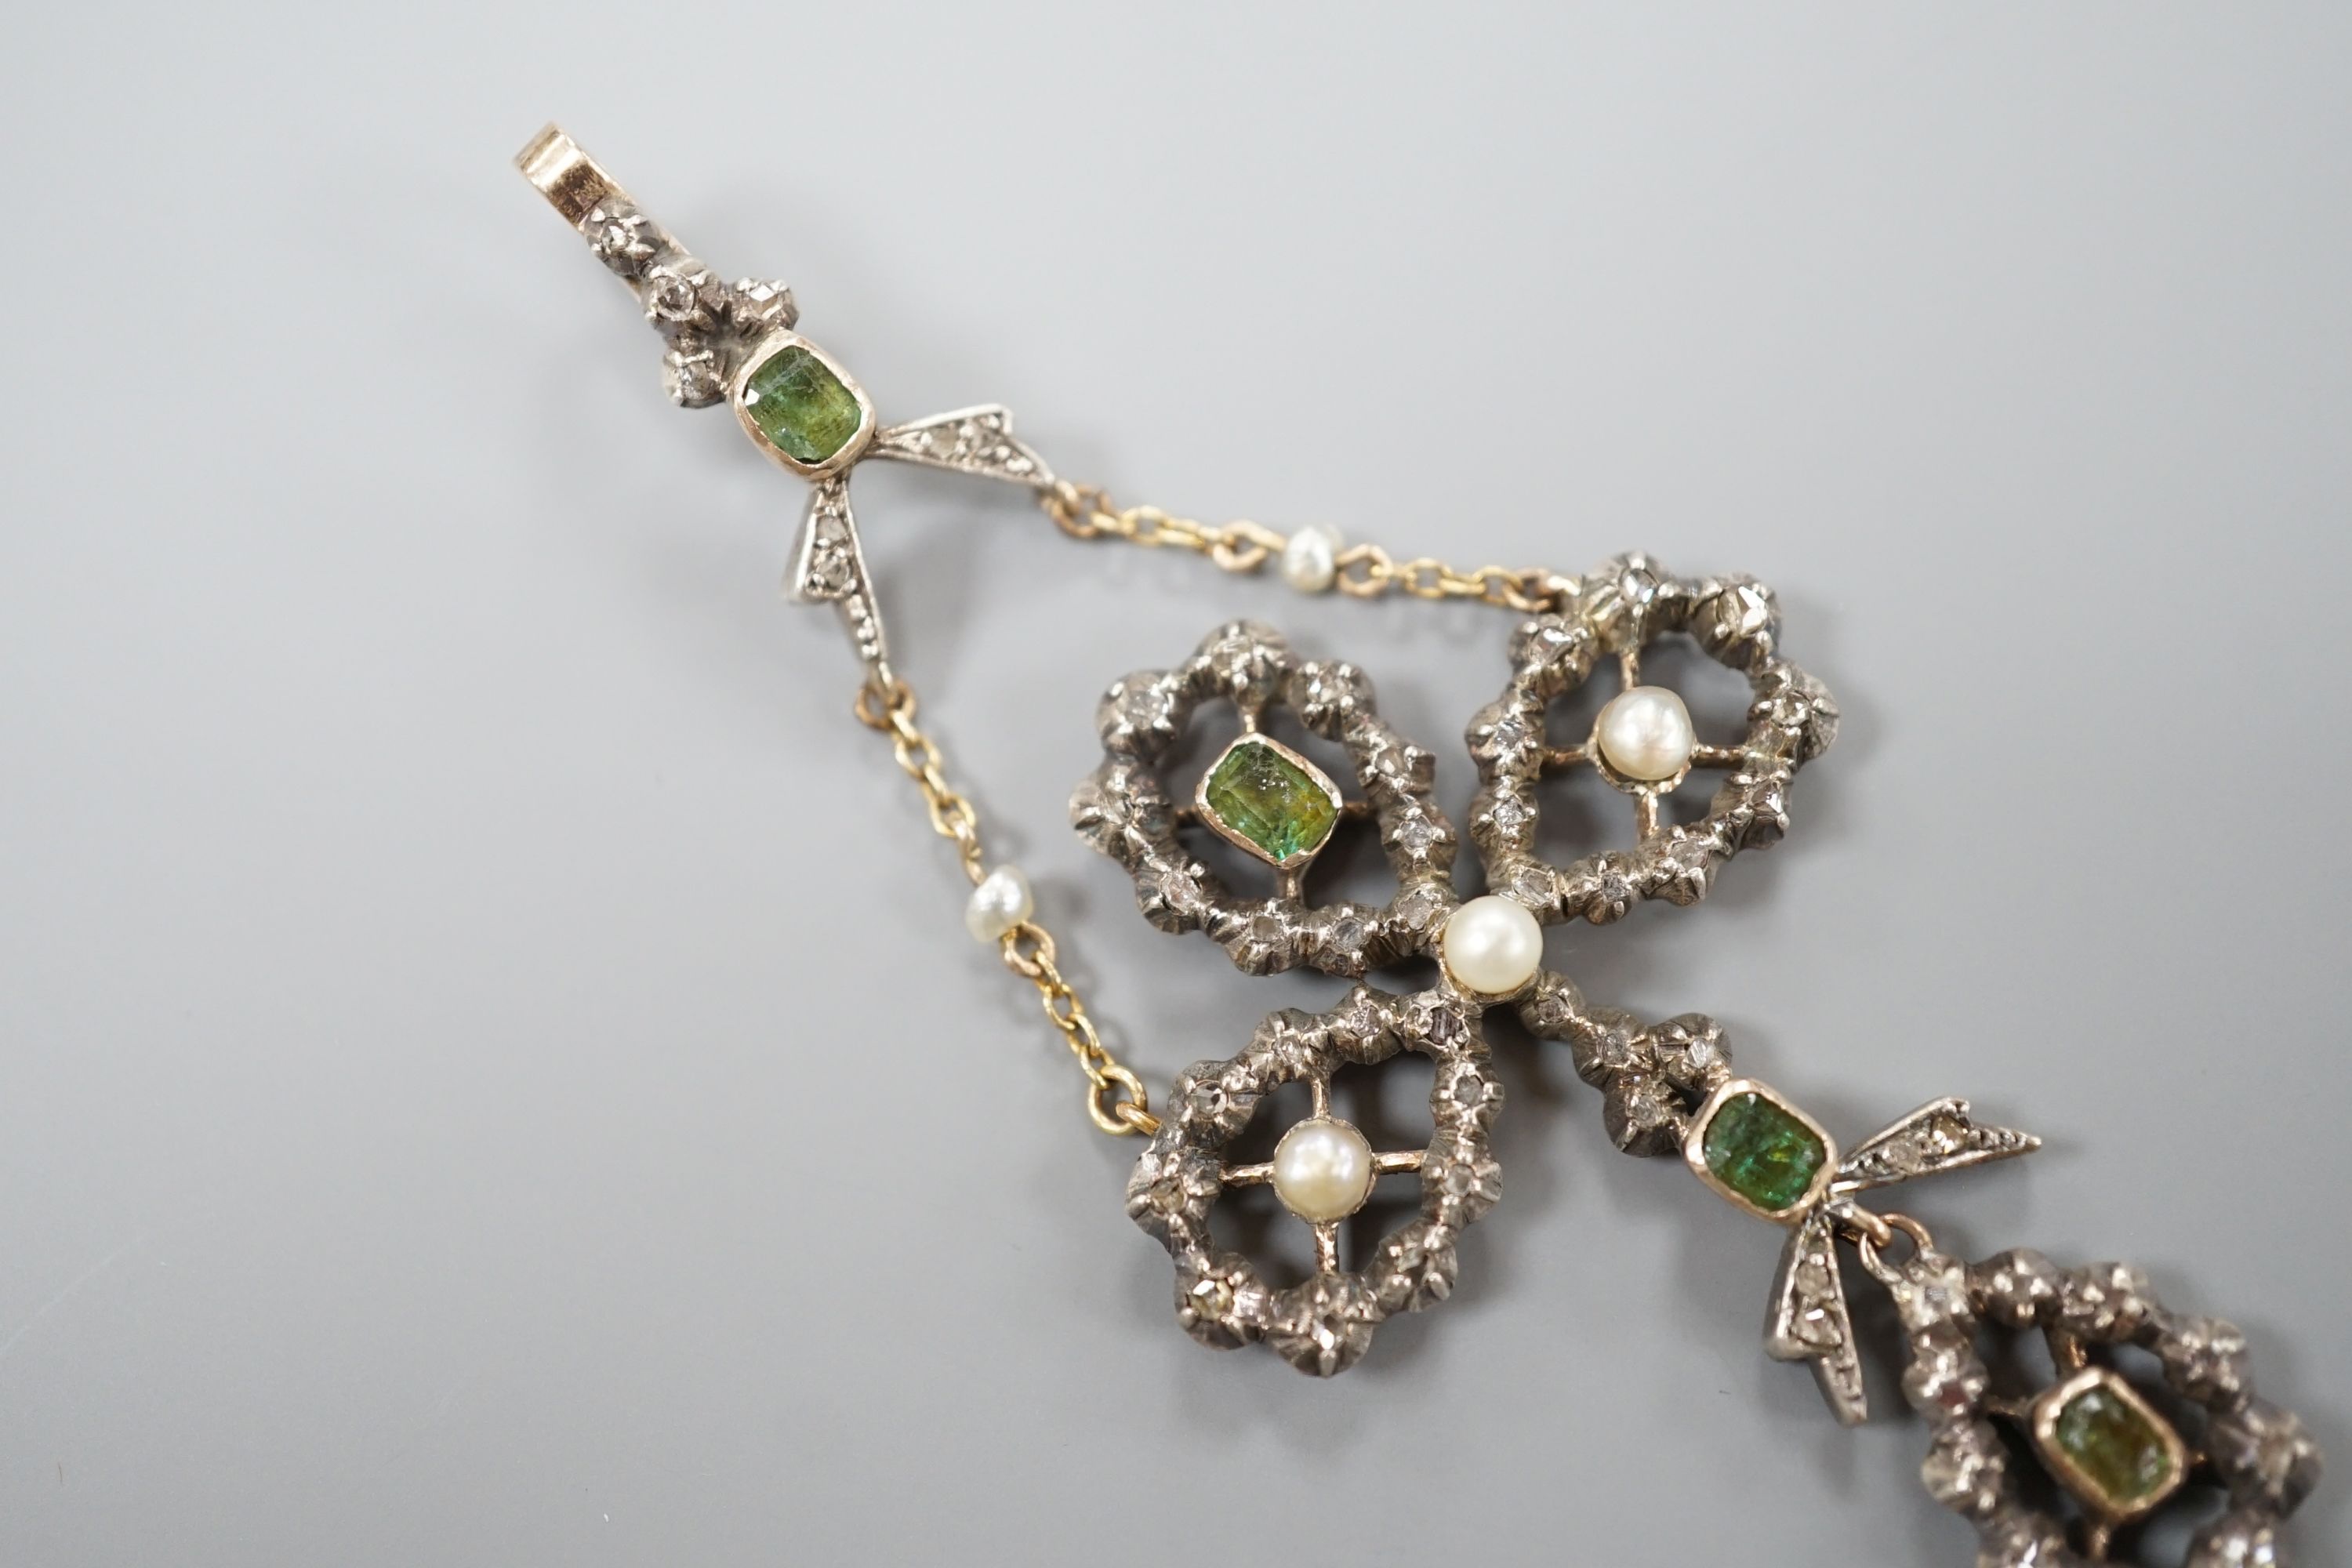 A 19th century continental, yellow and white metal, rose cut diamond, seed pearl and gem set drop pendant, 75mm, gross weight 10.4 grams.